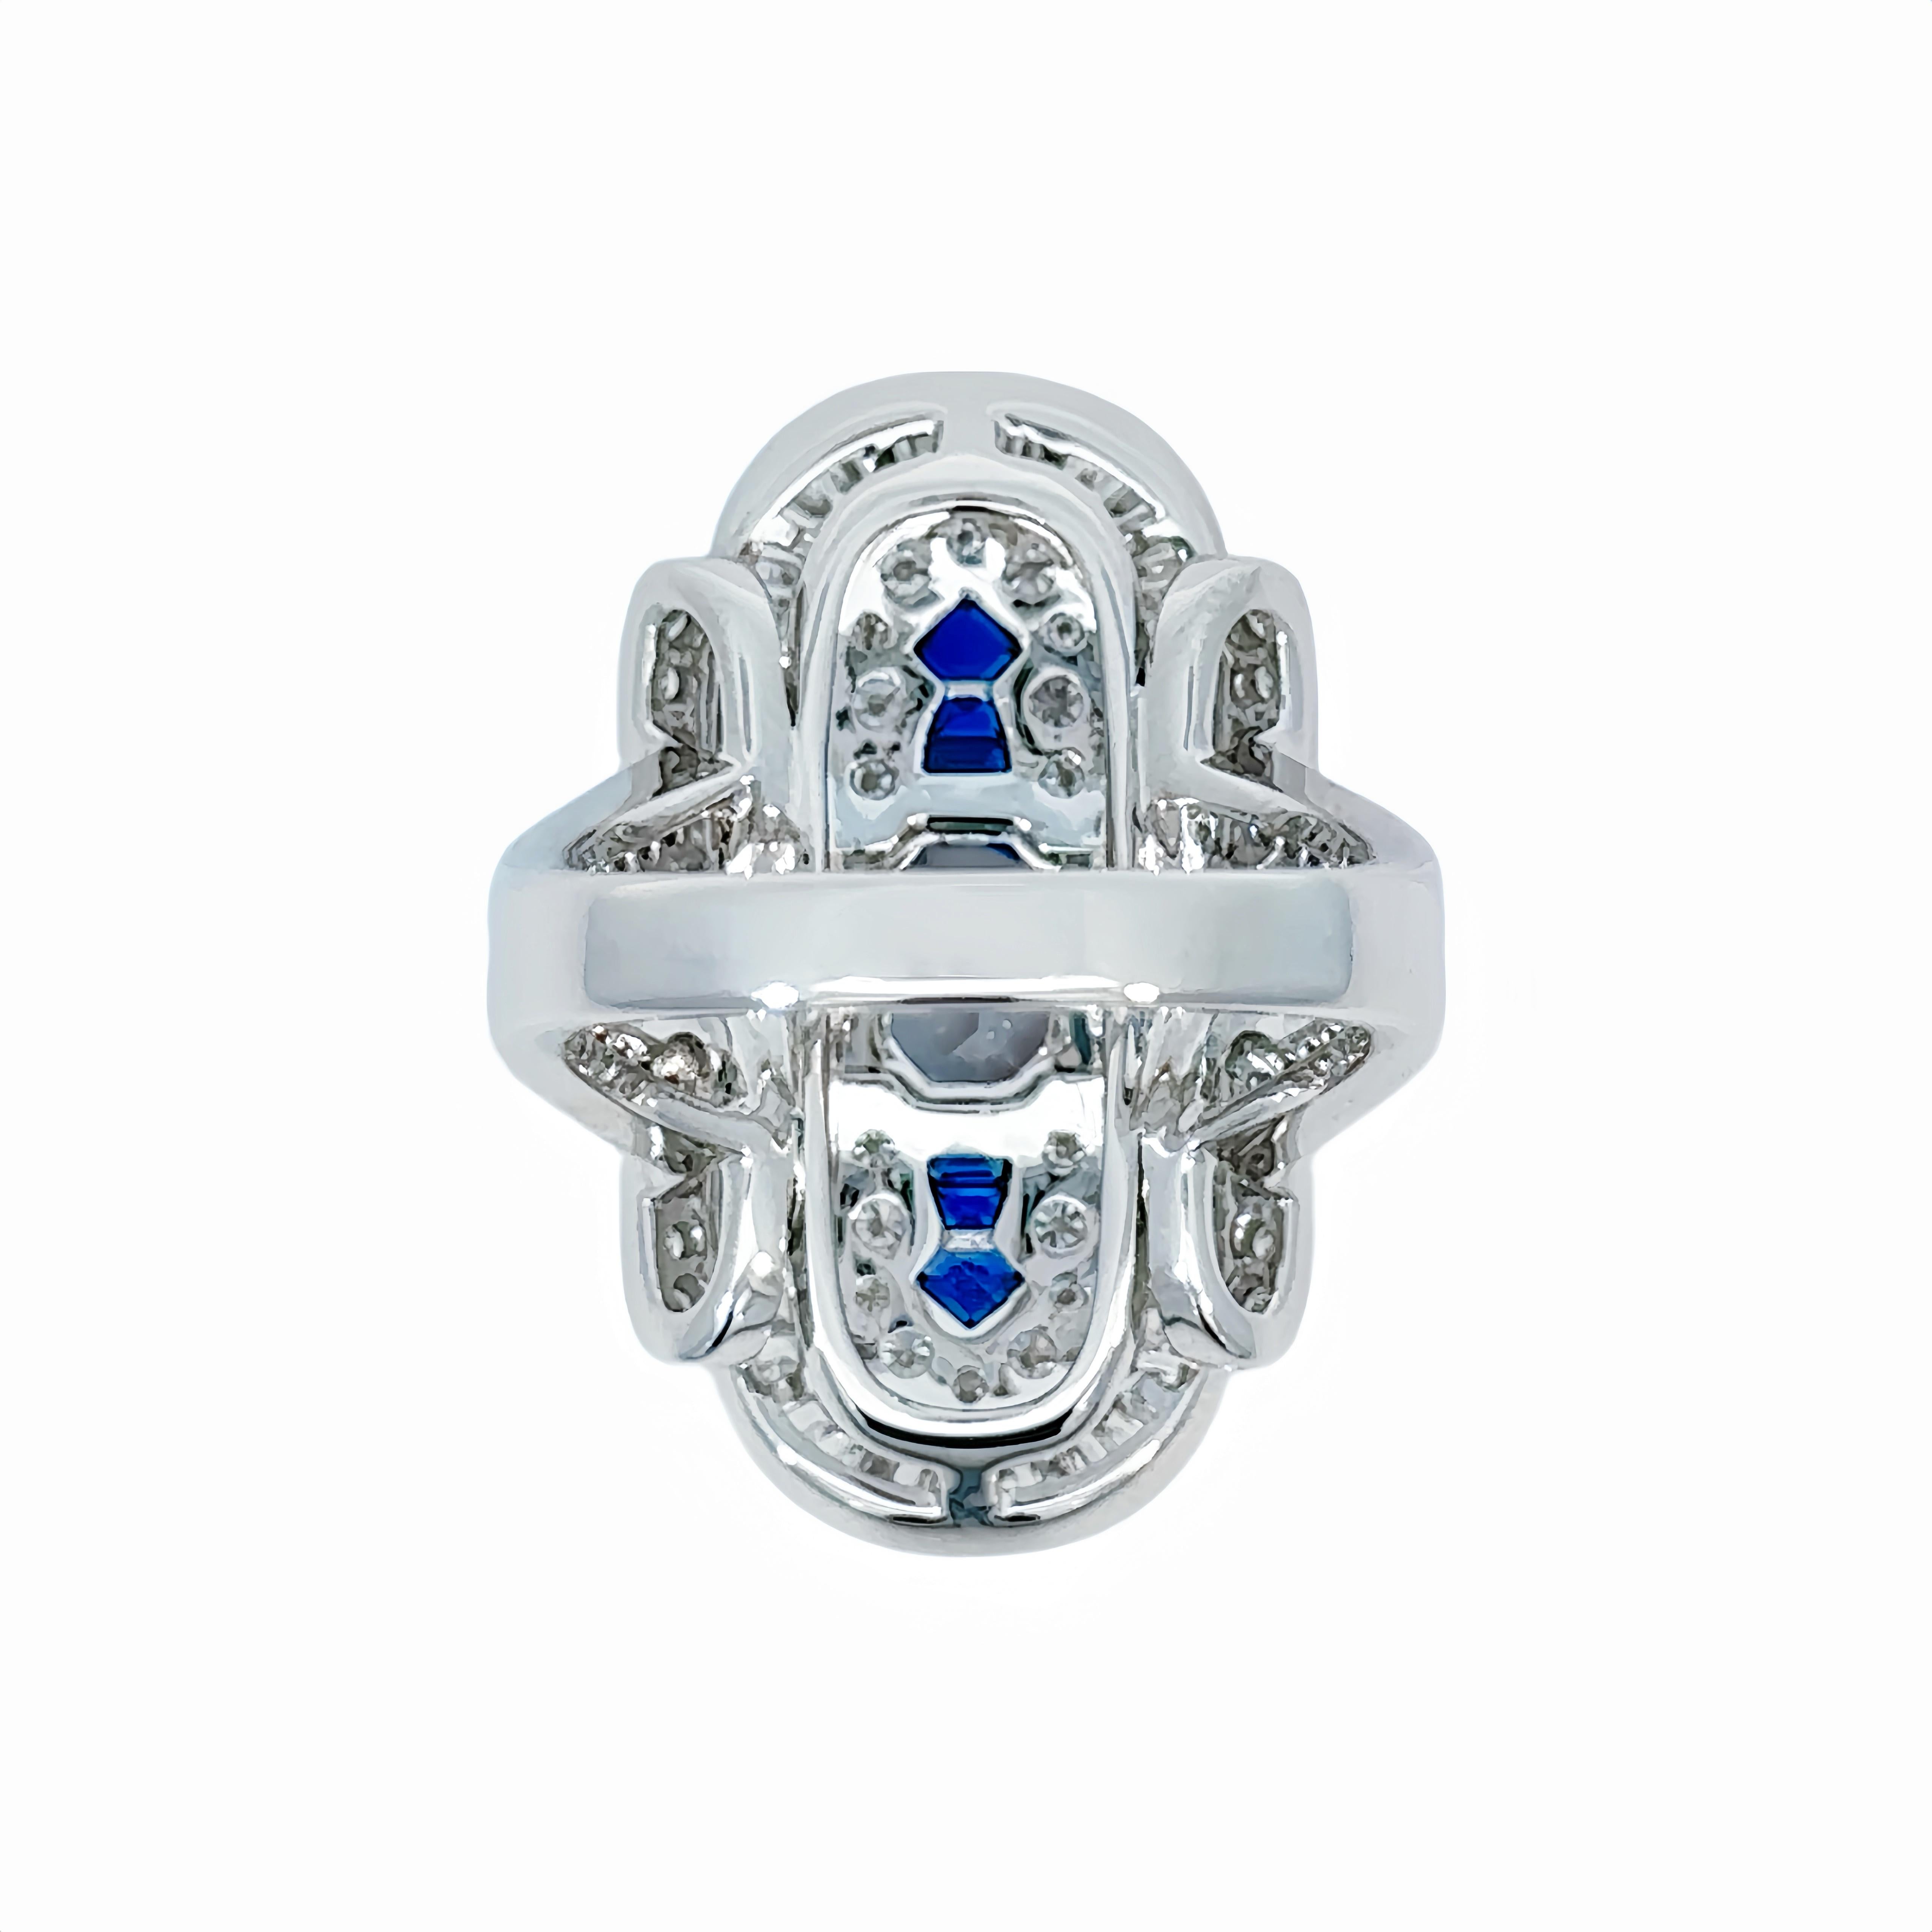 Boucheron inspired Art deco Sapphire Diamond Cocktail Ring, Made to Order For Sale 1